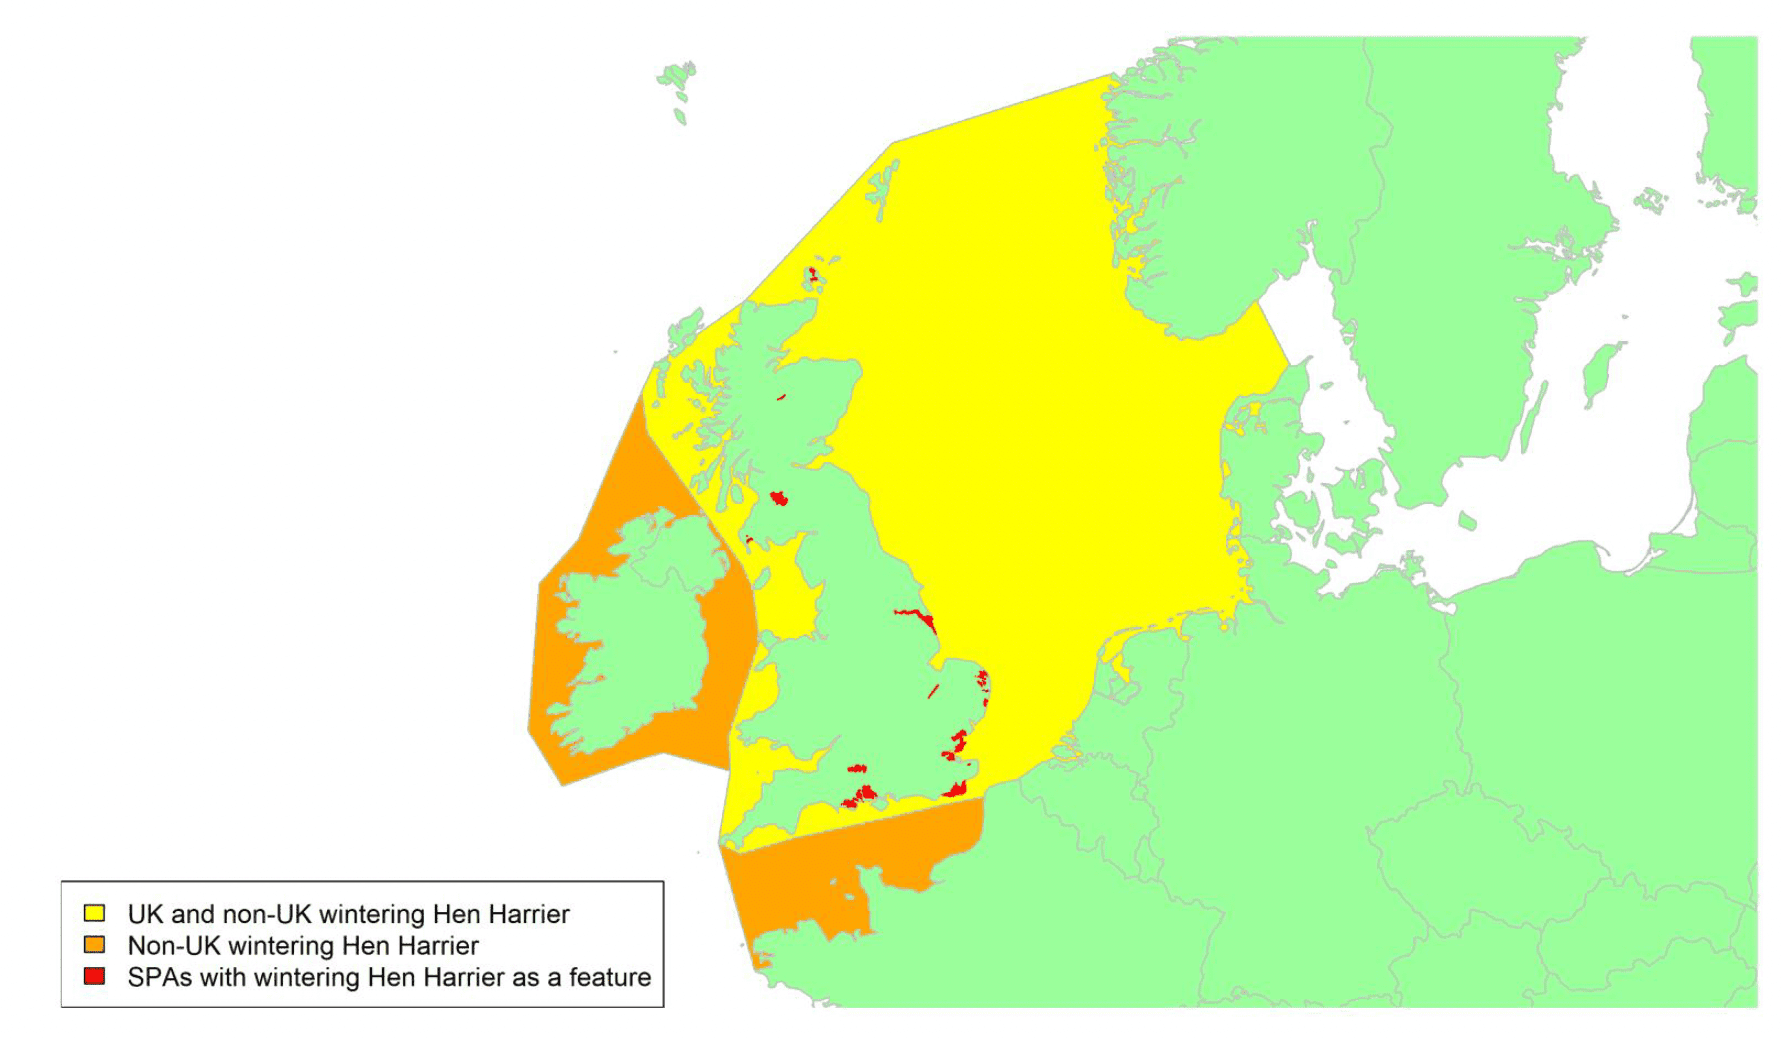 Map of North West Europe showing migratory routes and SPAs within the UK for wintering Hen Harrier as described in the text below.